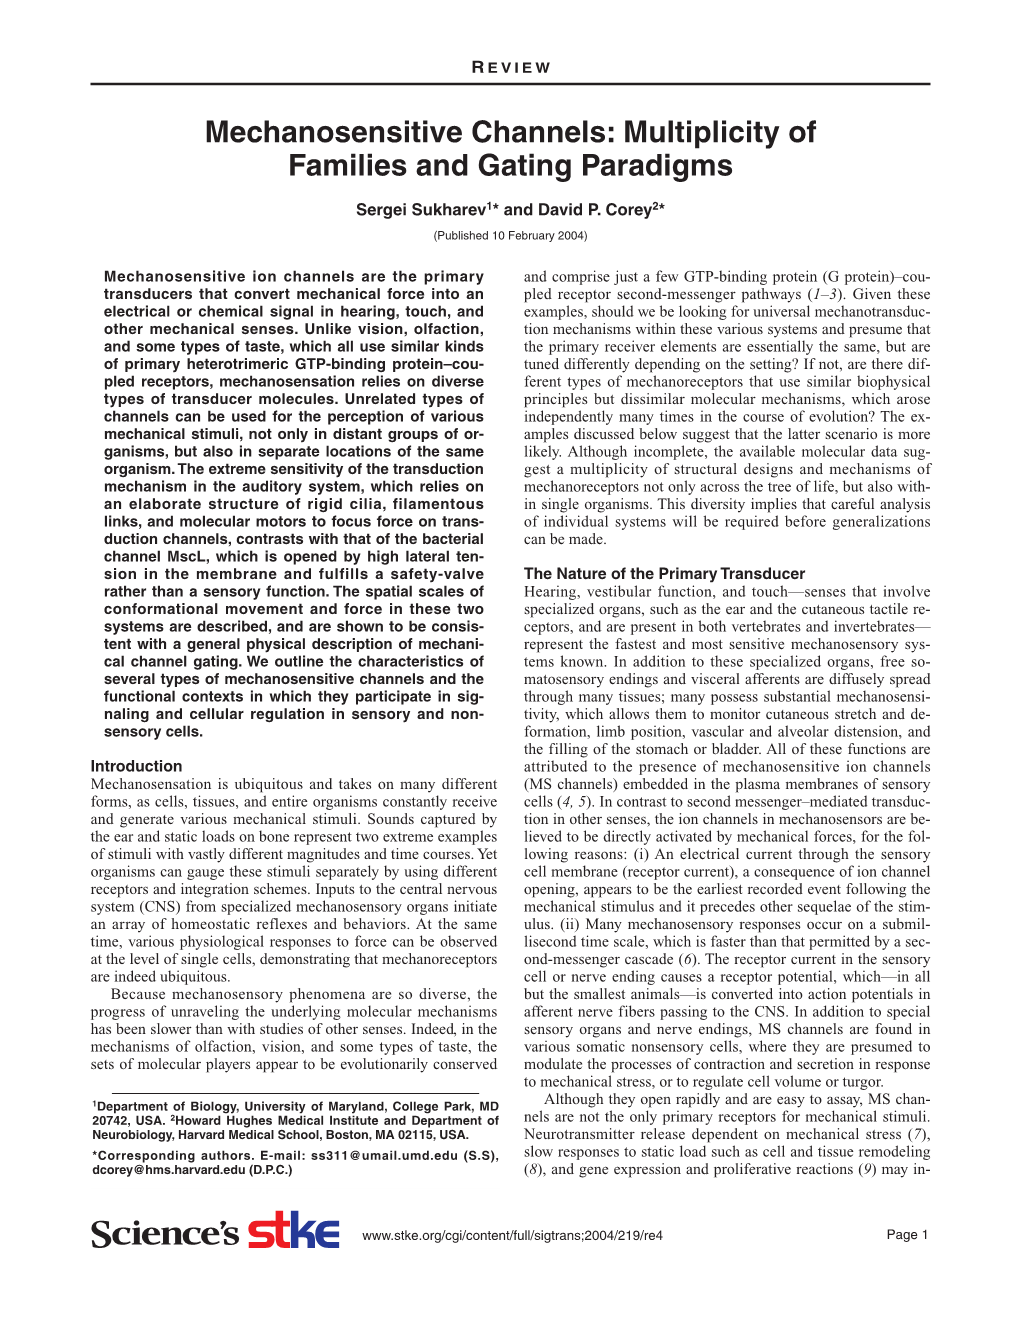 Mechanosensitive Channels: Multiplicity of Families and Gating Paradigms